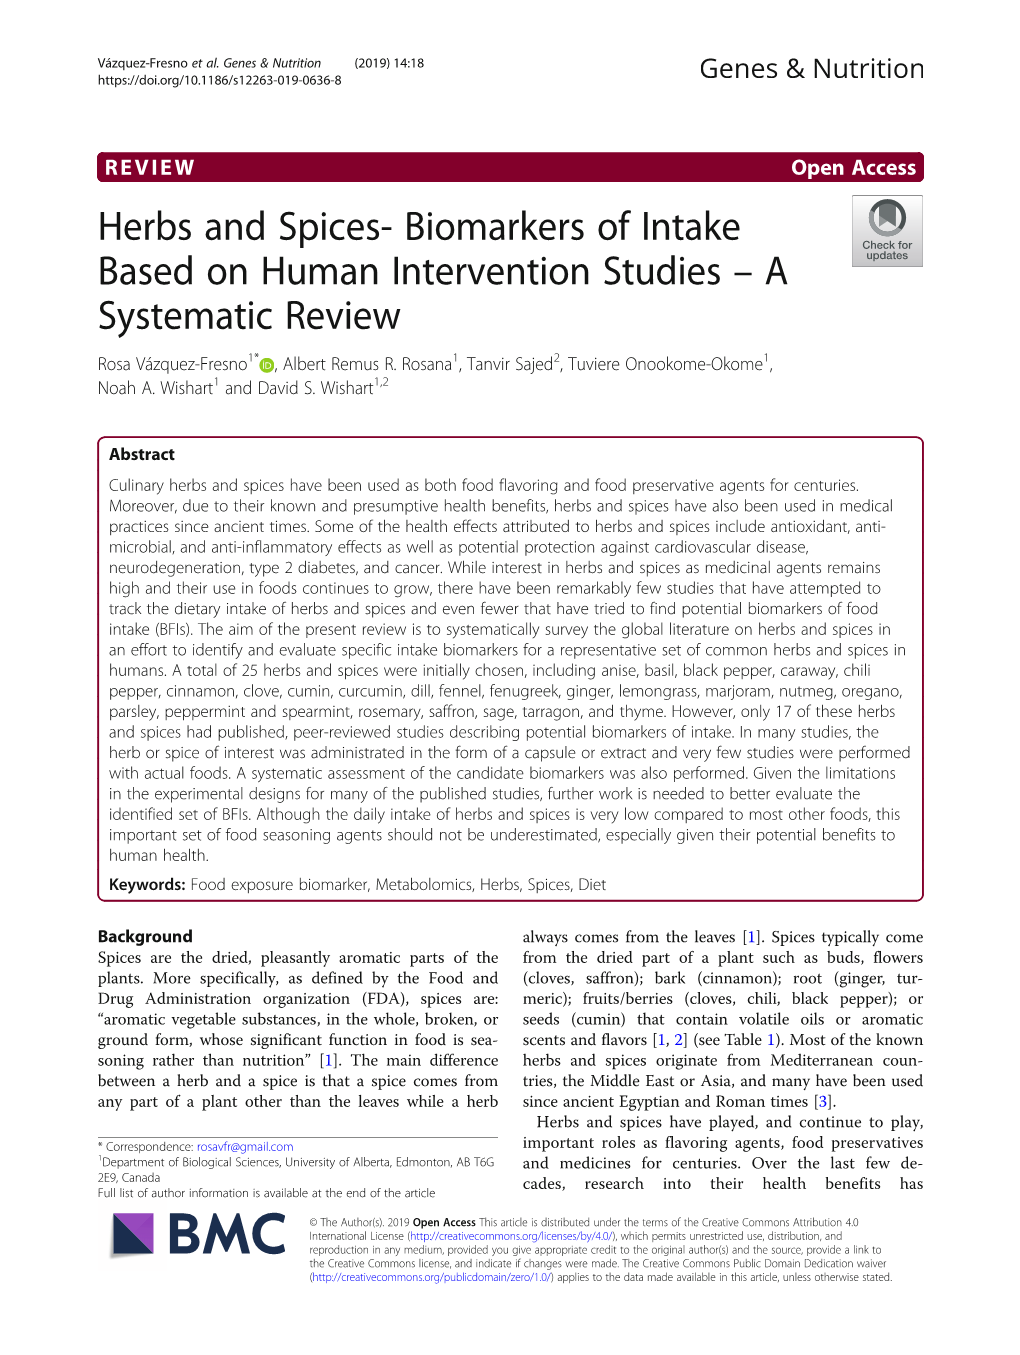 Herbs and Spices- Biomarkers of Intake Based on Human Intervention Studies – a Systematic Review Rosa Vázquez-Fresno1* , Albert Remus R